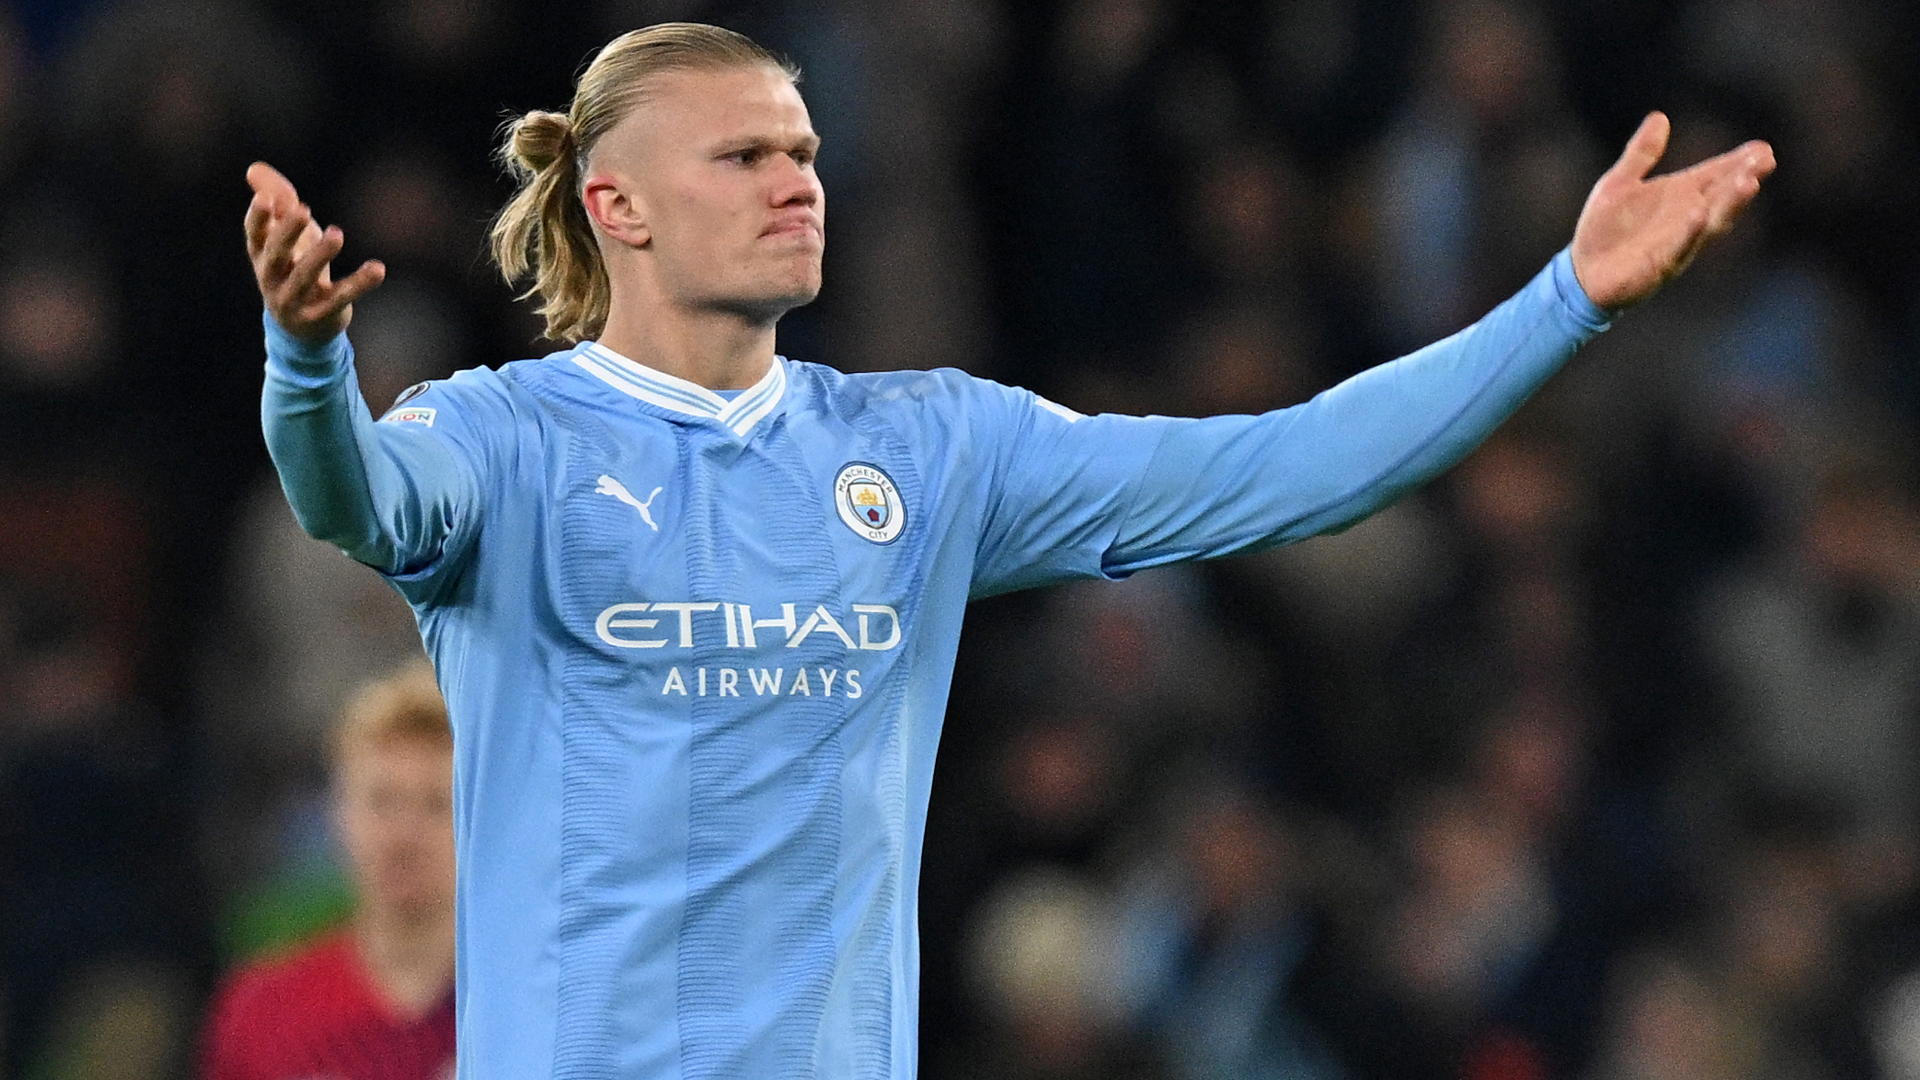 More records for Erling Haaland! Man City goal machine unseats Kylian Mbappe & Ruud van Nistelrooy after grabbing 40th Champions League strike